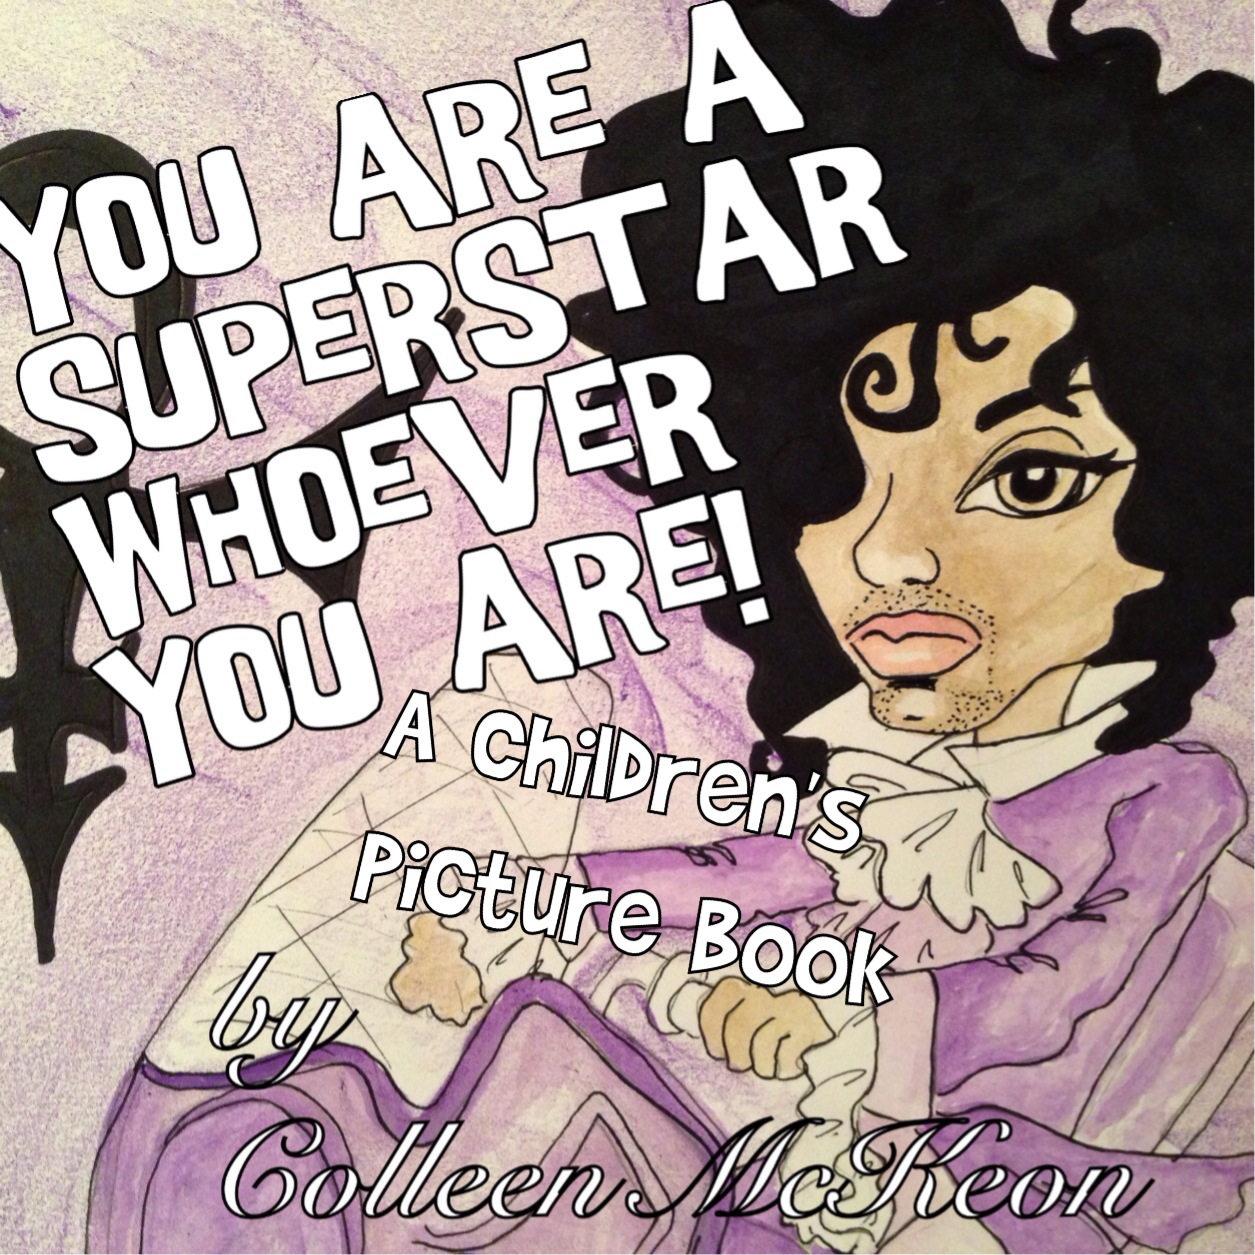 YOU ARE A SUPERSTAR WHOEVER YOU ARE!